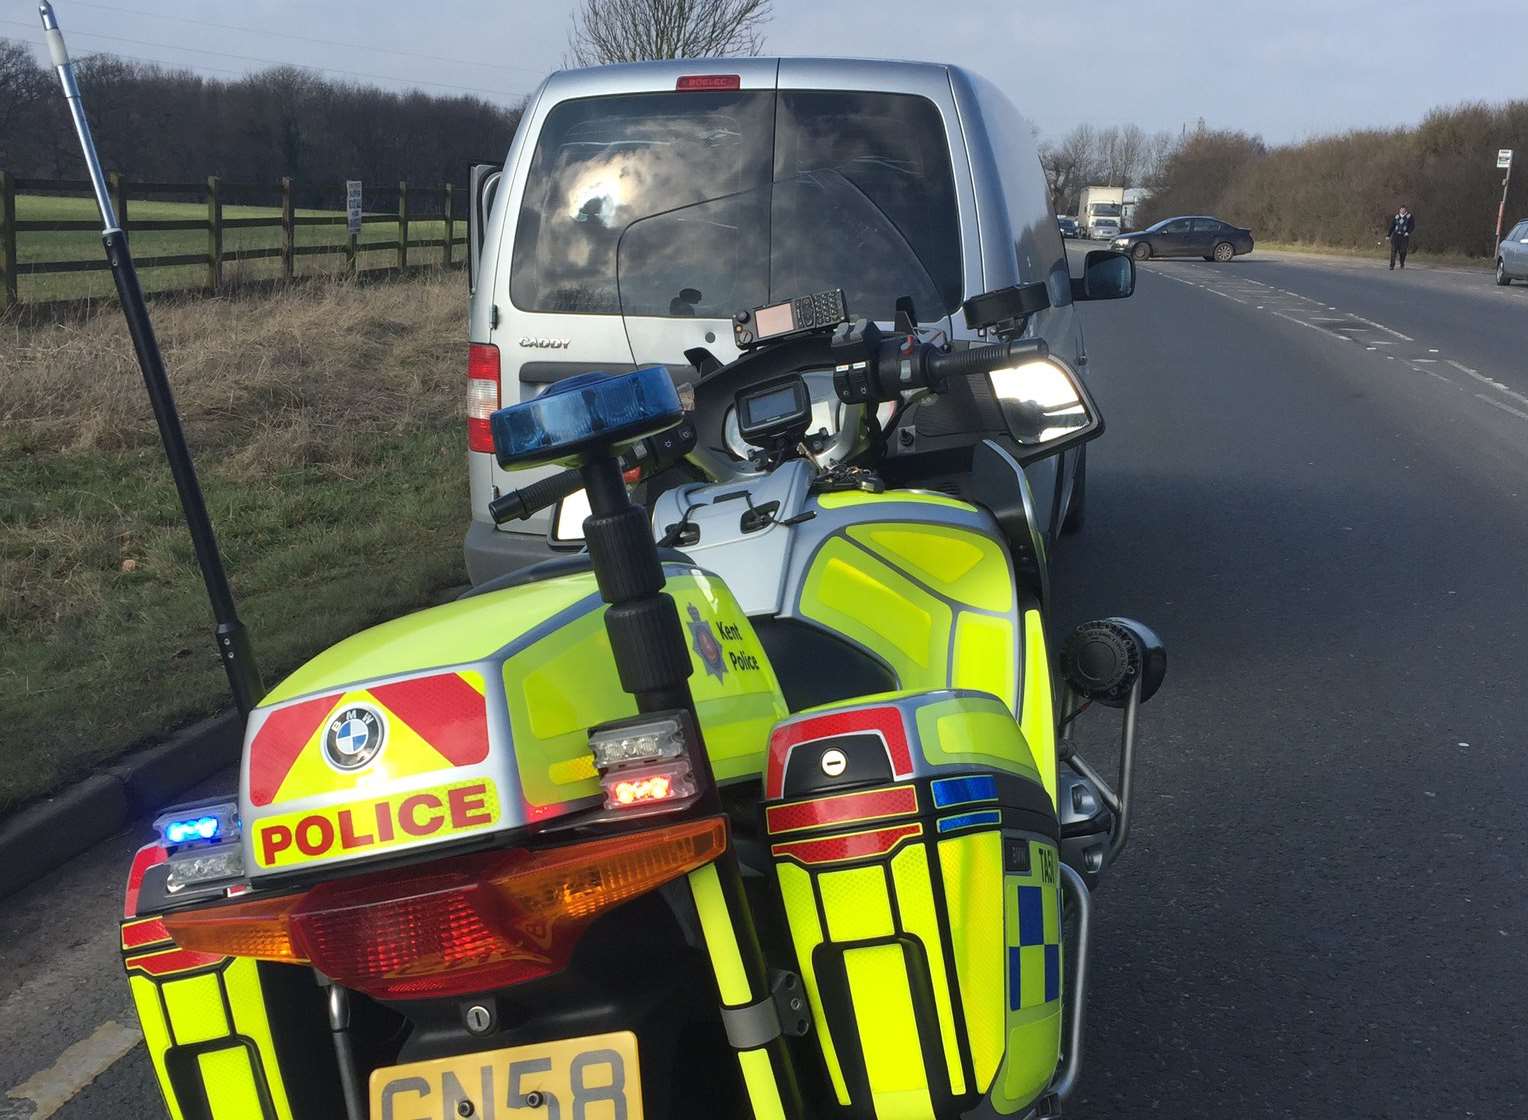 Kent Police roads team tweeted this picture of the stopped vehicle.